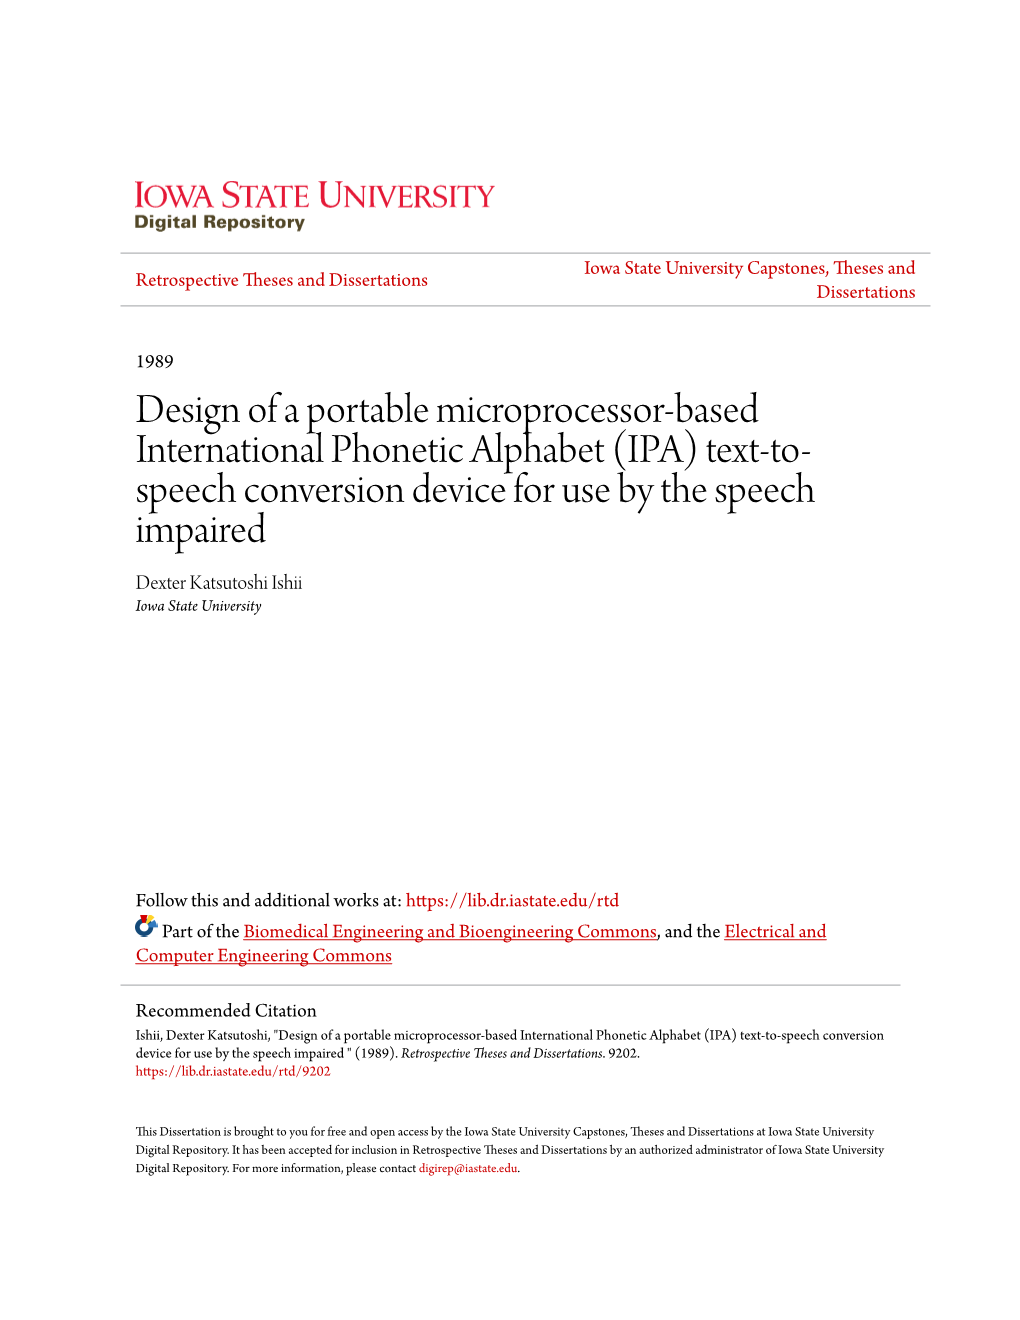 IPA) Text-To- Speech Conversion Device for Use by the Speech Impaired Dexter Katsutoshi Ishii Iowa State University